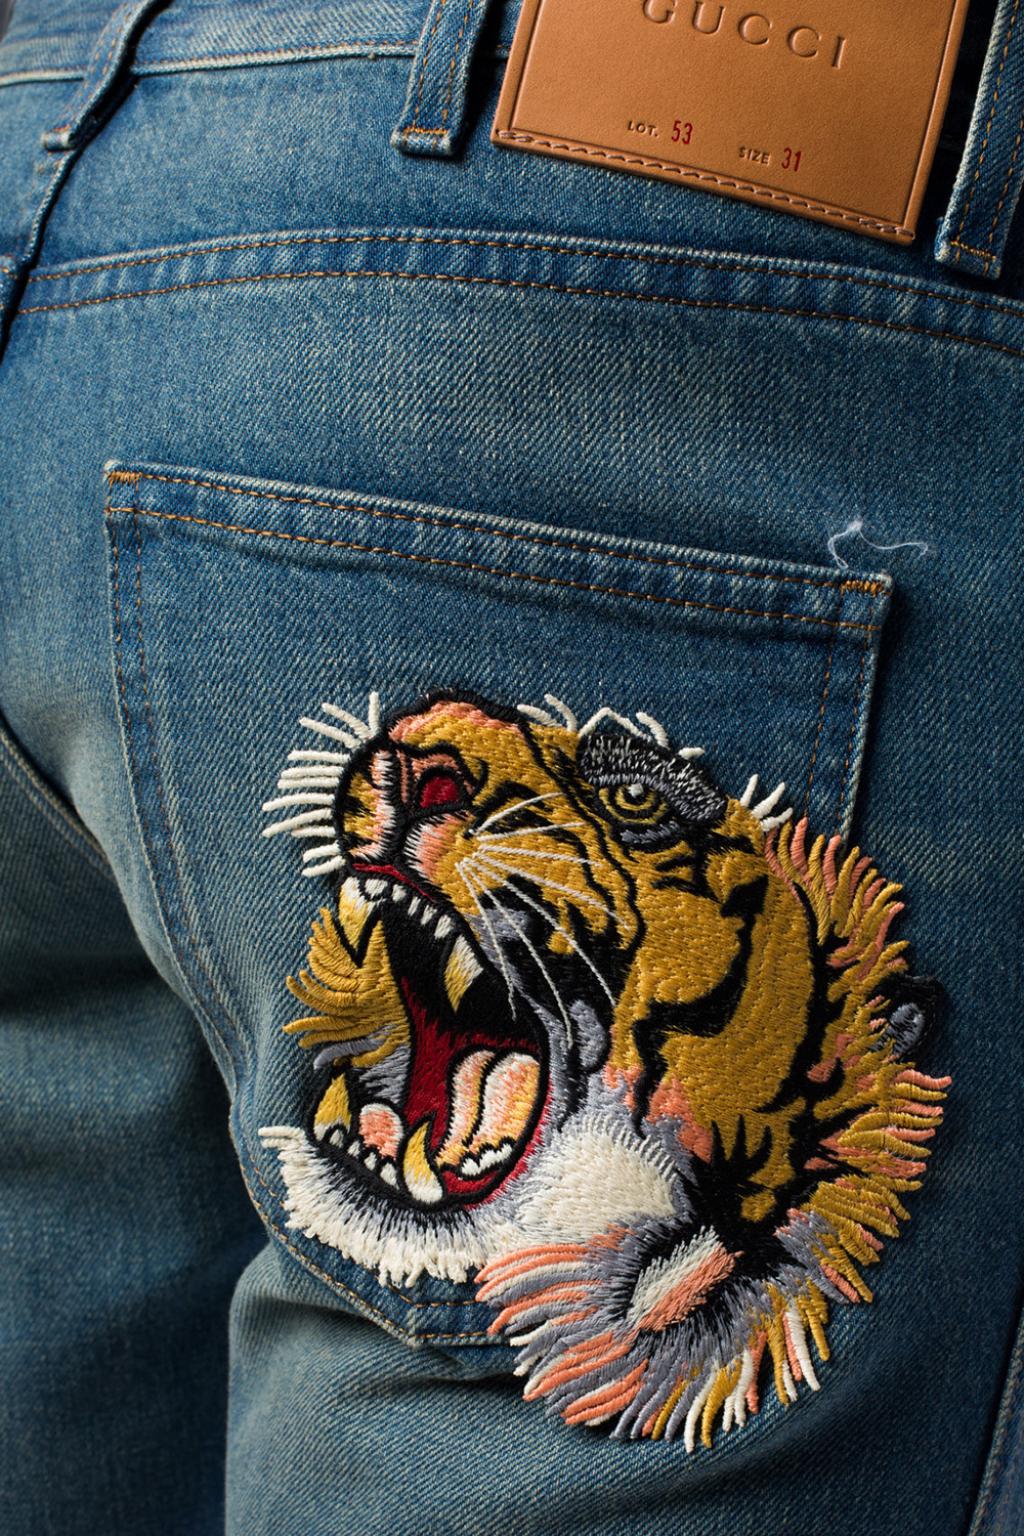 gucci embroidered tiger